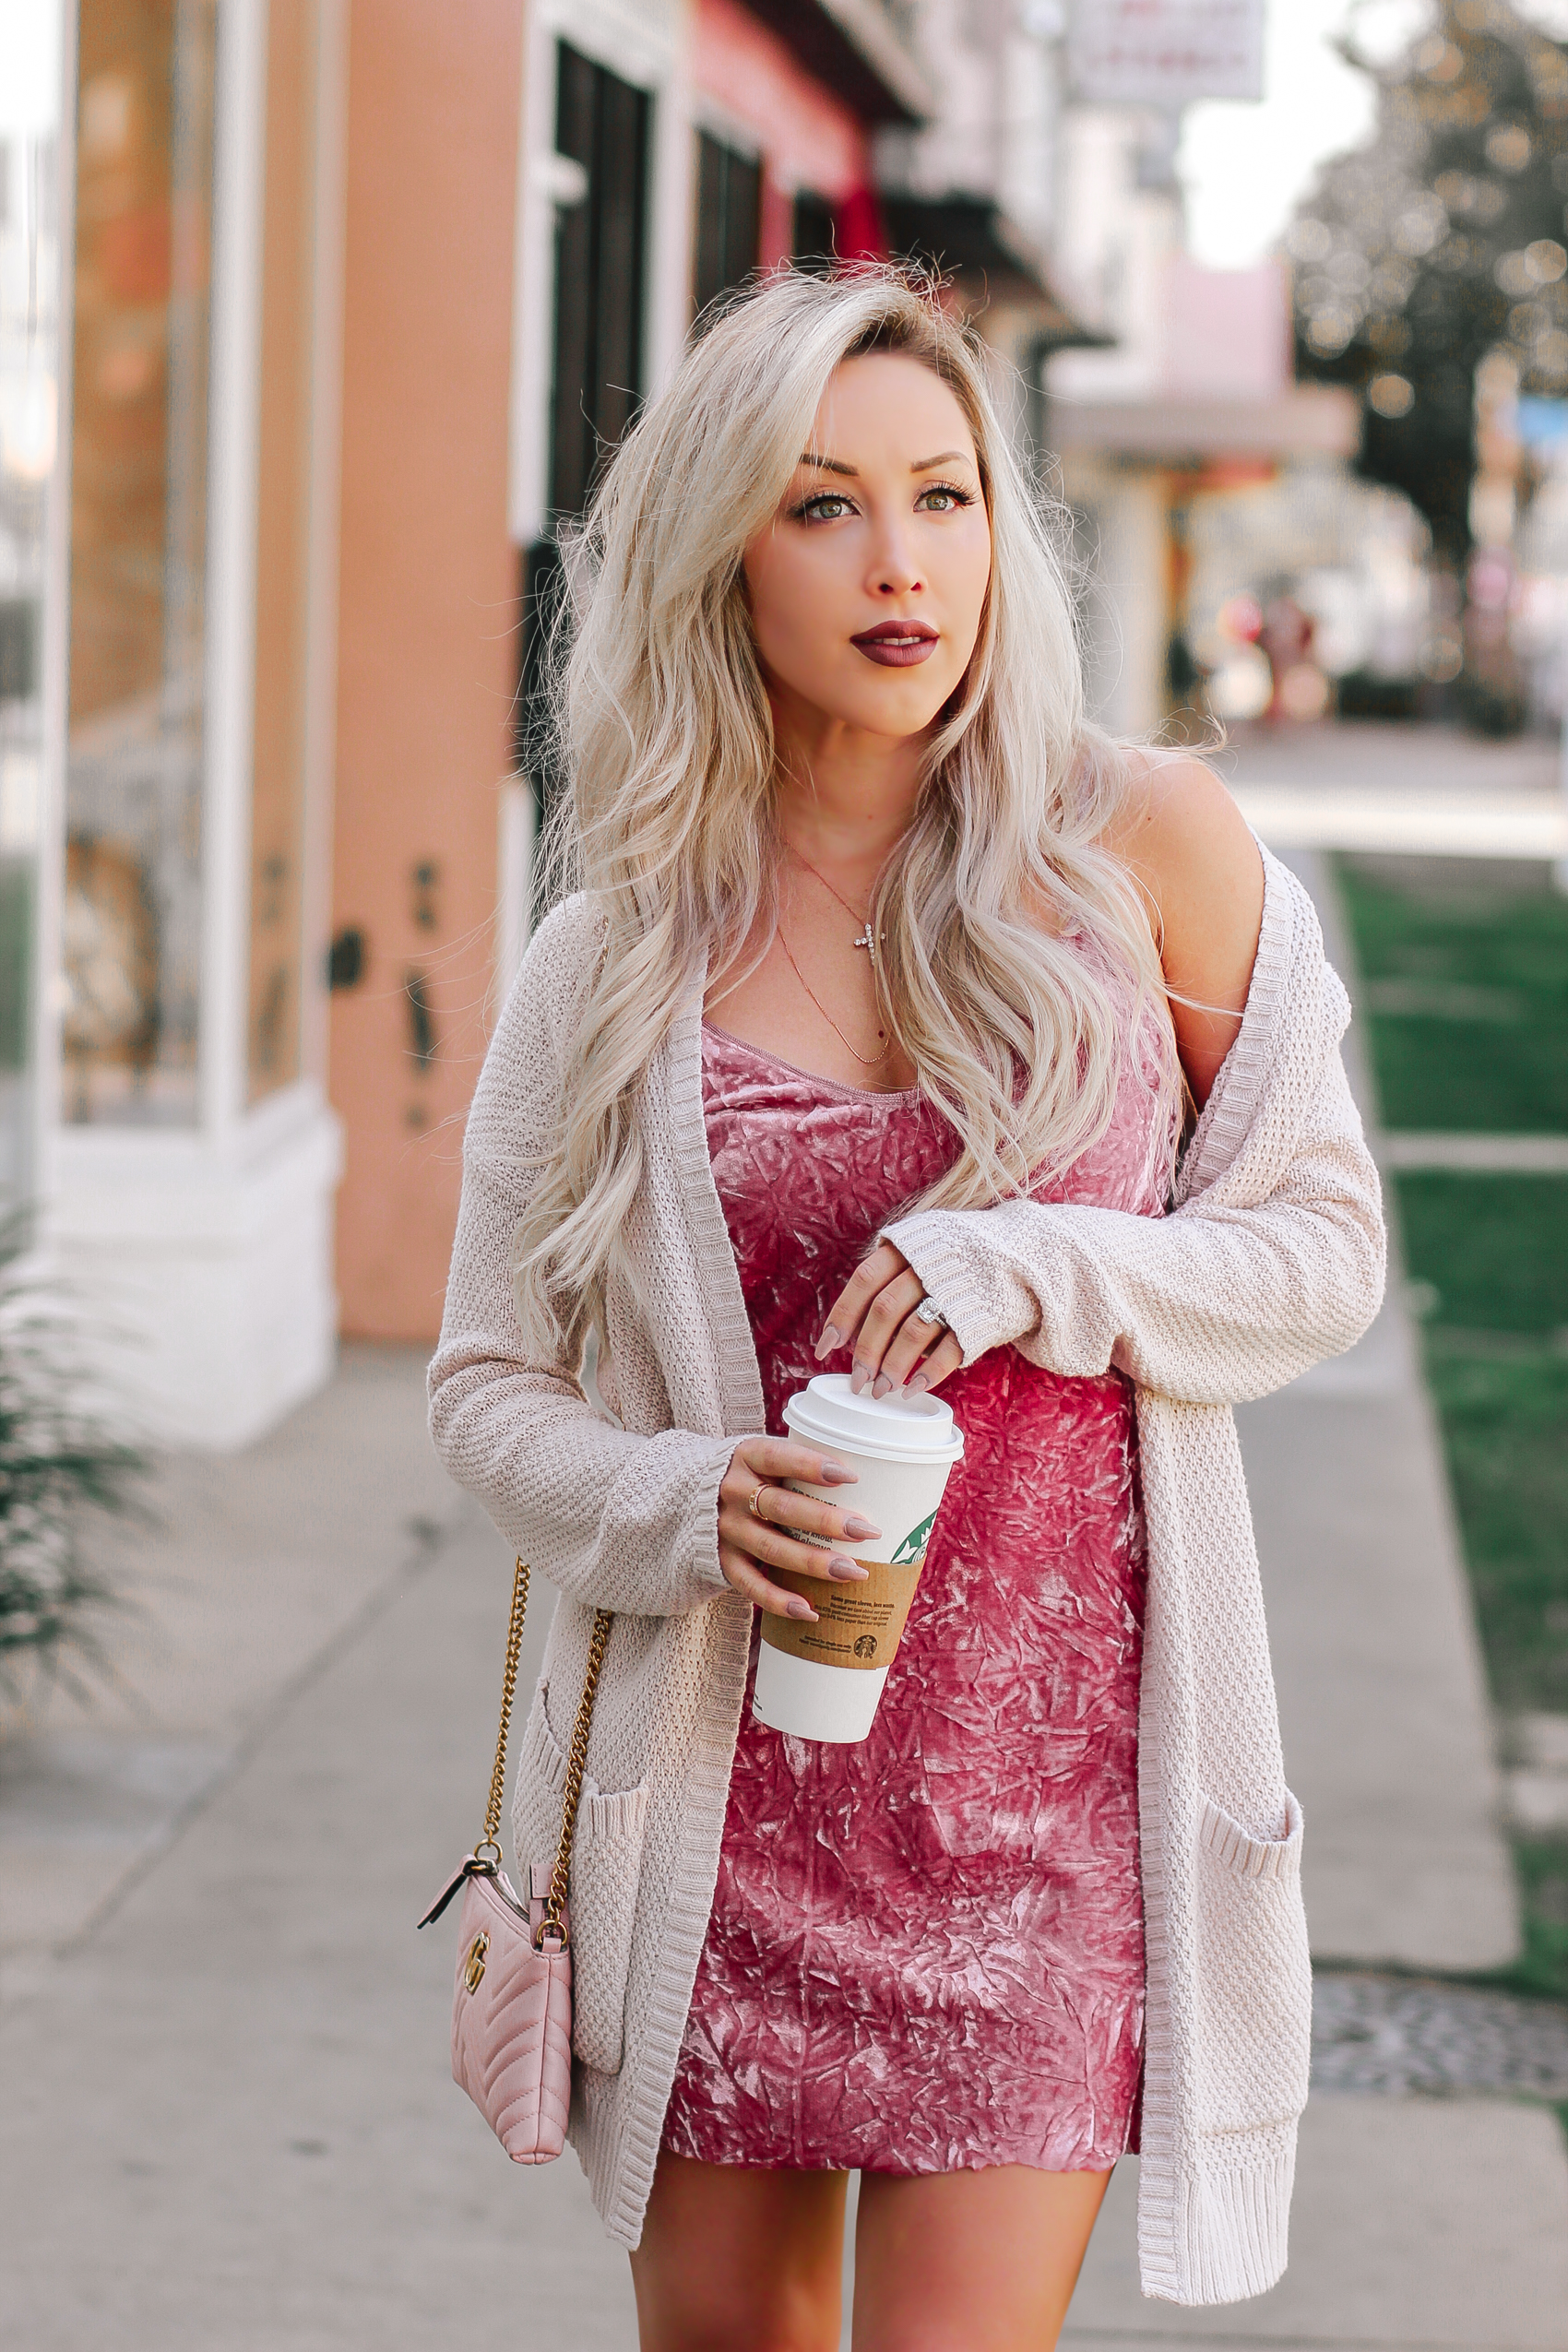 Pink Crushed Velvet Dress, Blush Pink Gucci Crossbody, Pink Louboutins | Valentine's Day inspired Outfit | Blondie in the City by Hayley Larue